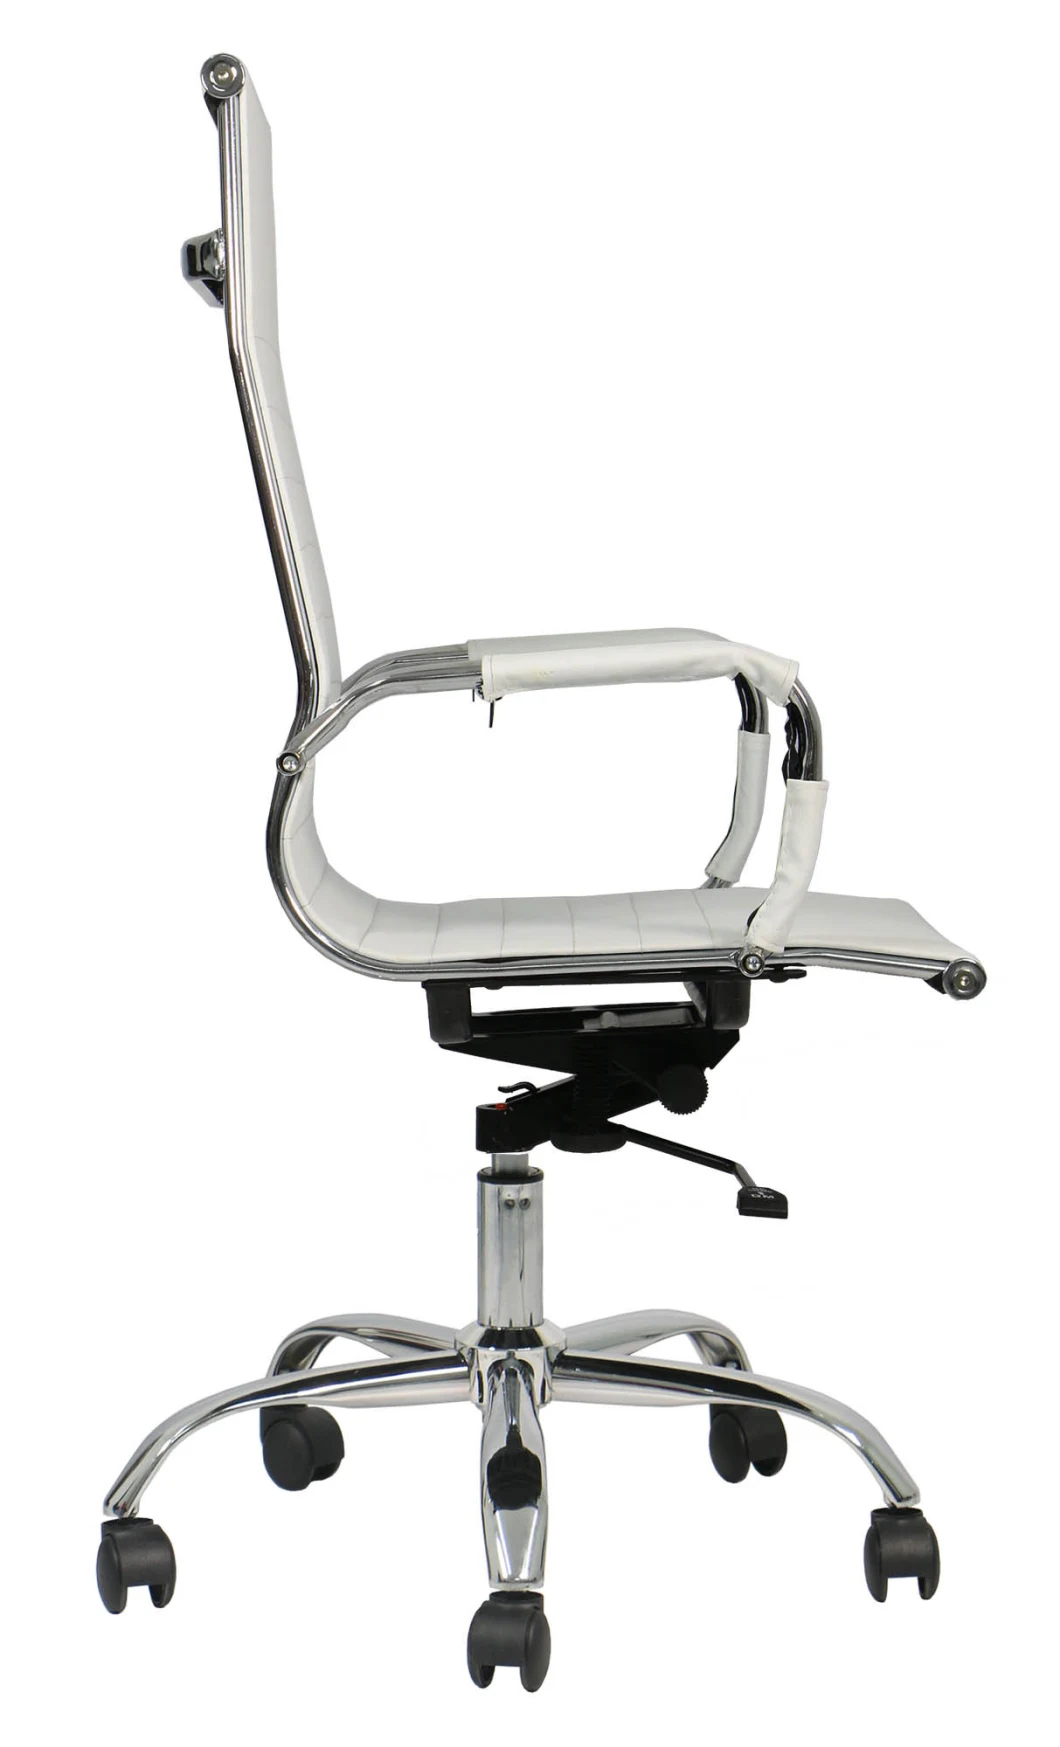 Ribbed Chairs Ergonomic Executive Conference Task Chair with Arms